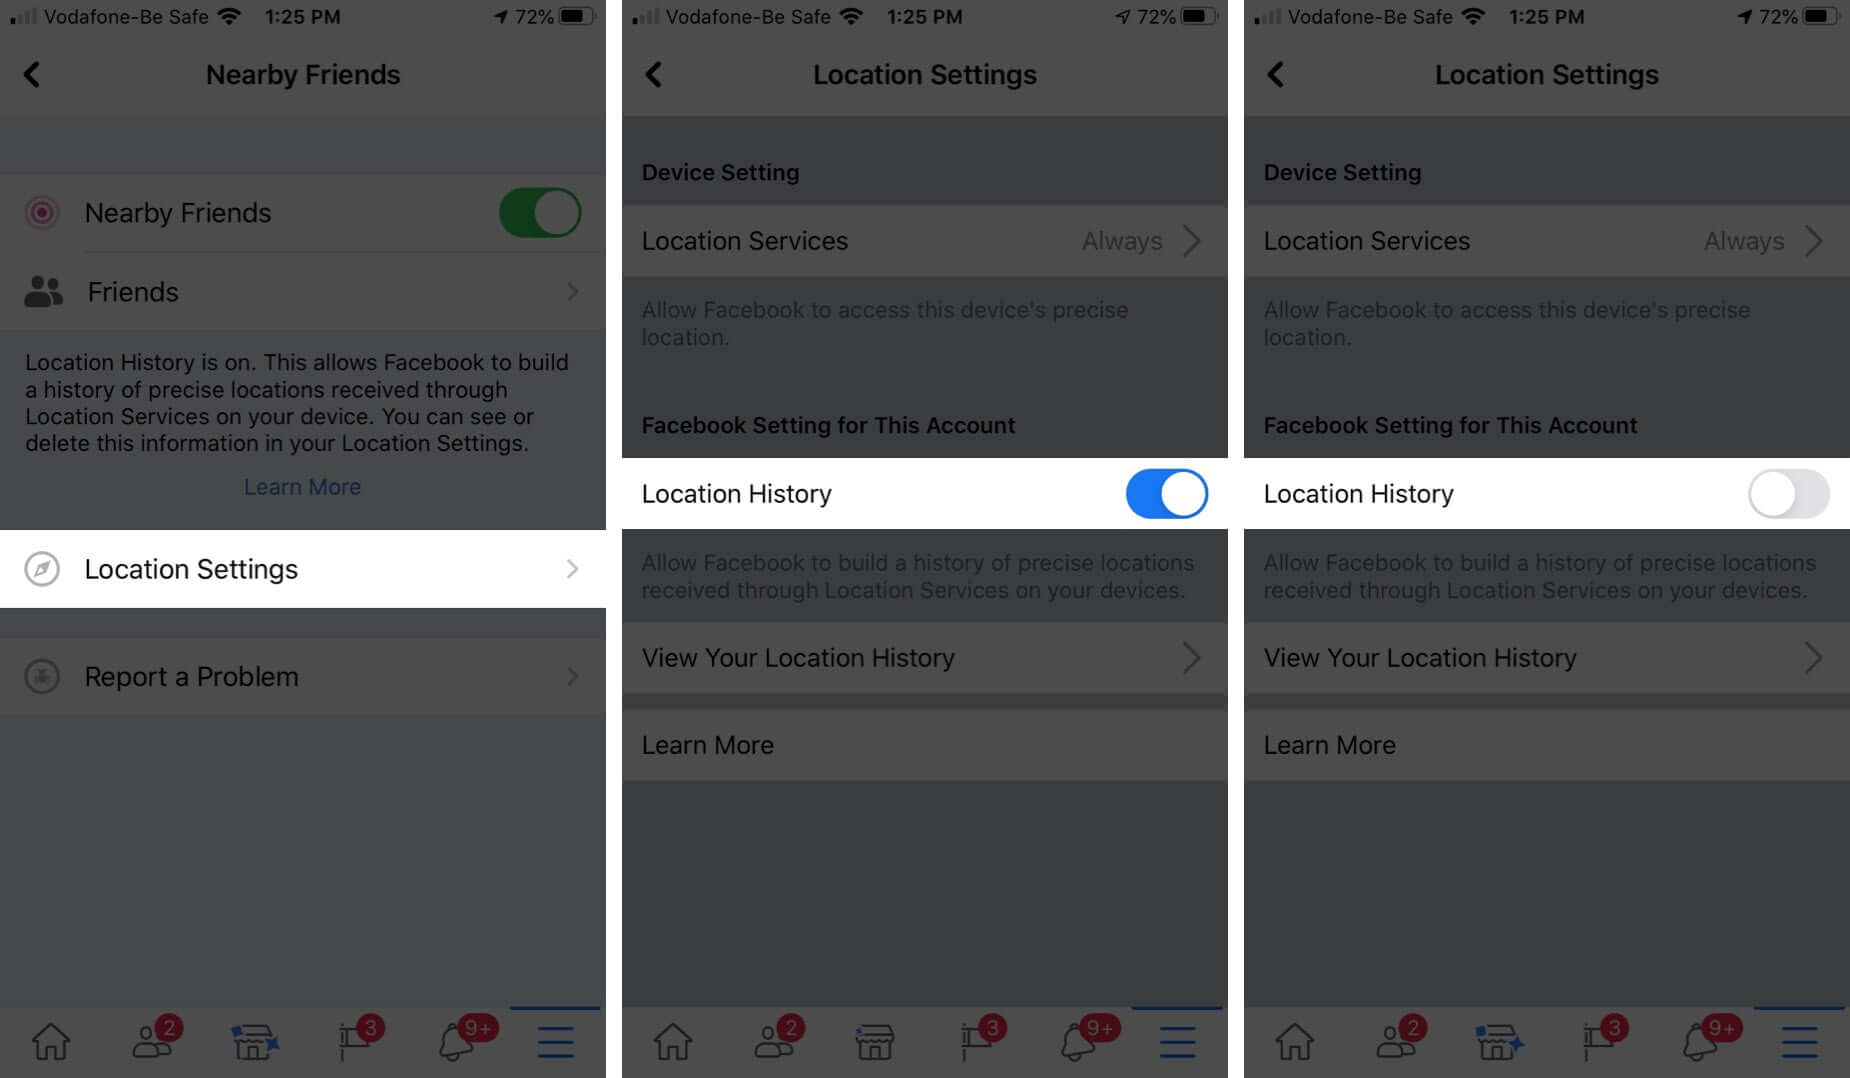 Tap on Location Settings and Disable Location History to Stop Facebook from Saving Location History